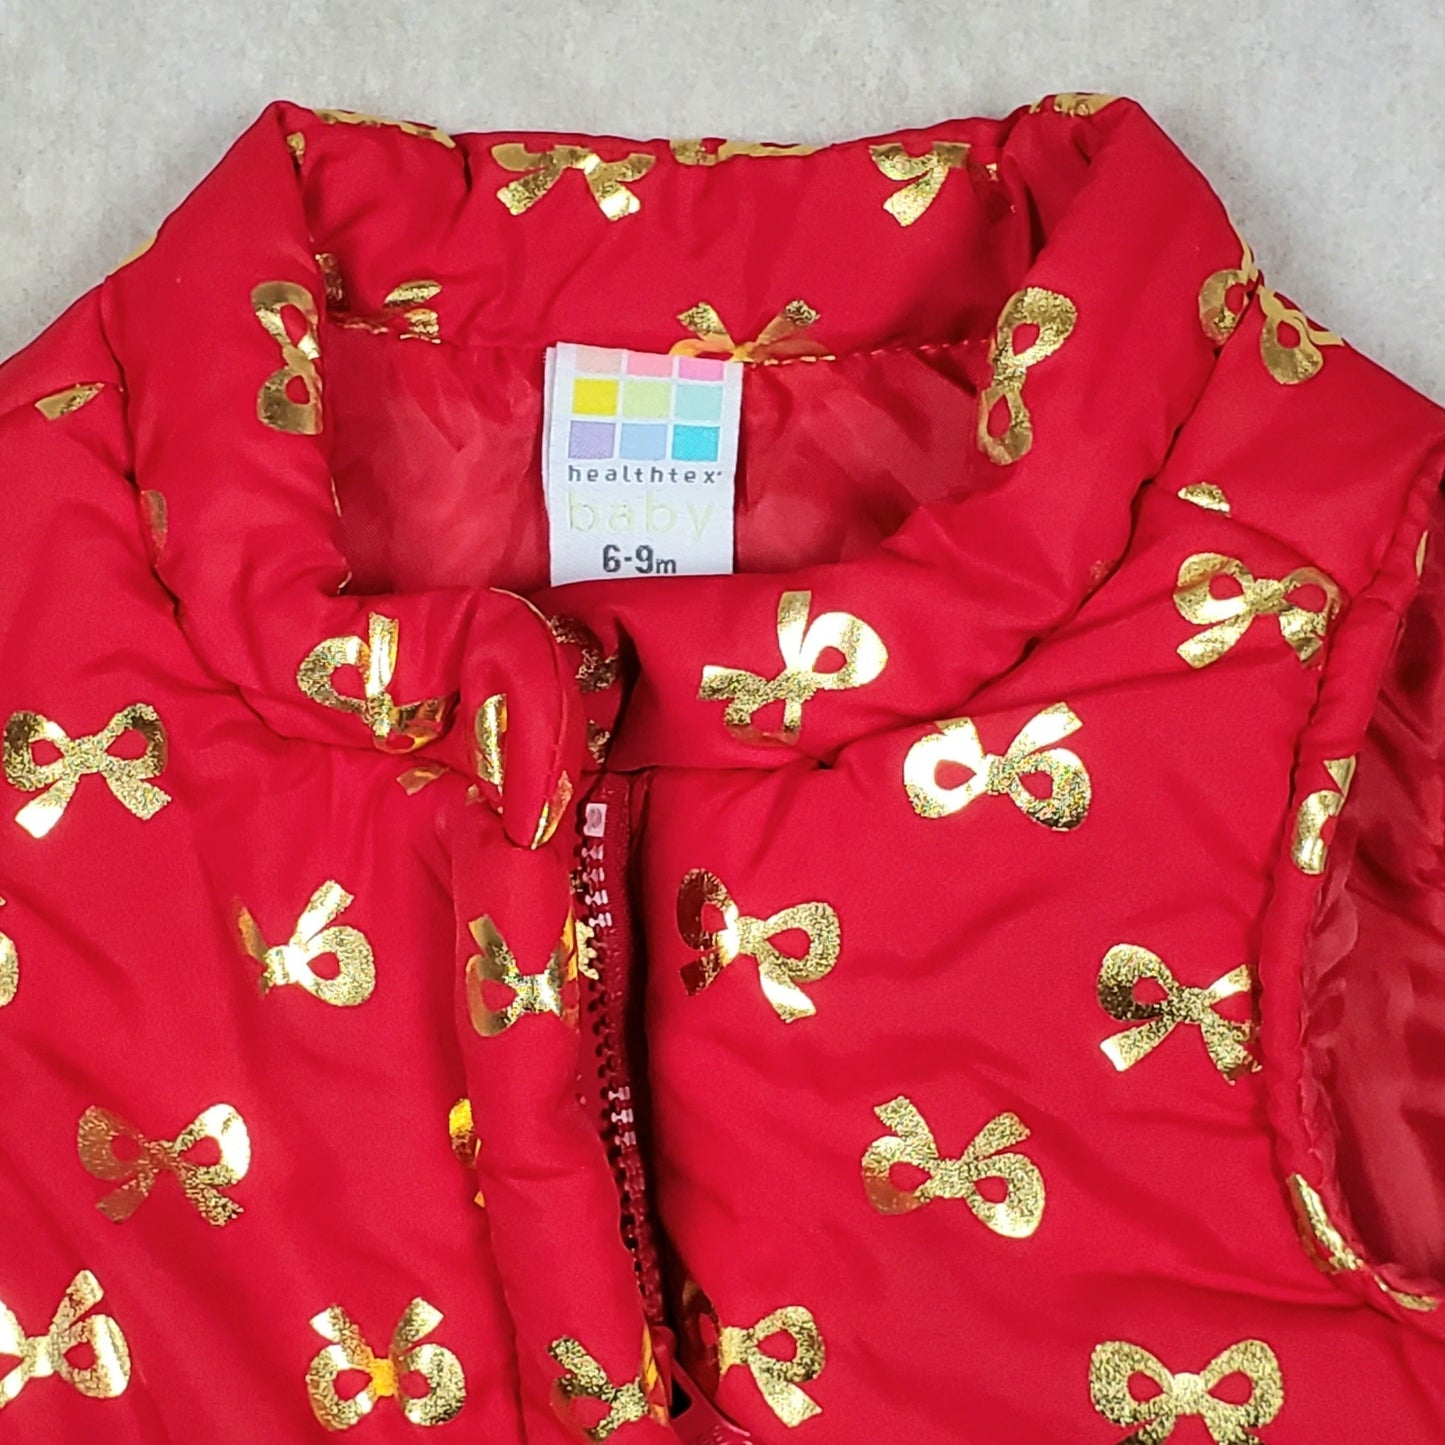 Healthtex Girls Red Bow Print Puffer Vest 6M Used View 4